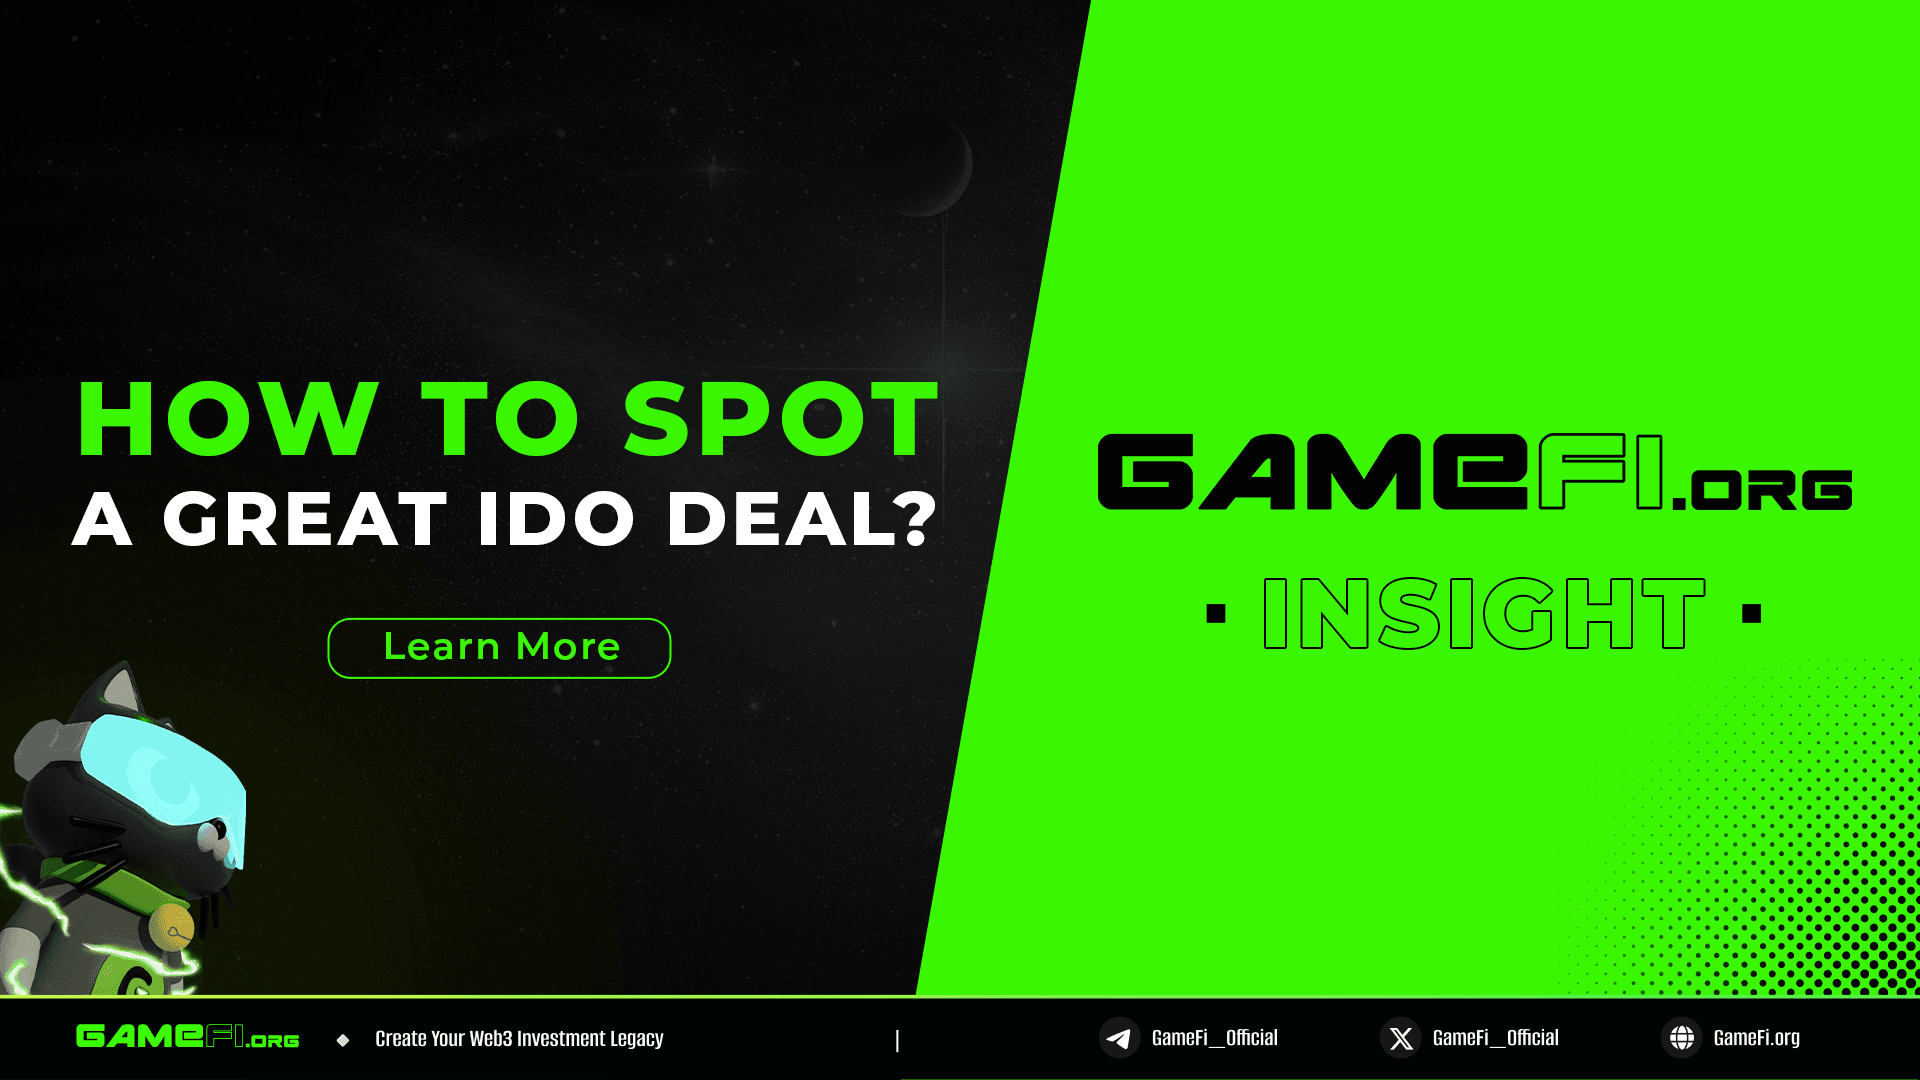 How To Spot A Great IDO Deal: A Beginner's Guide